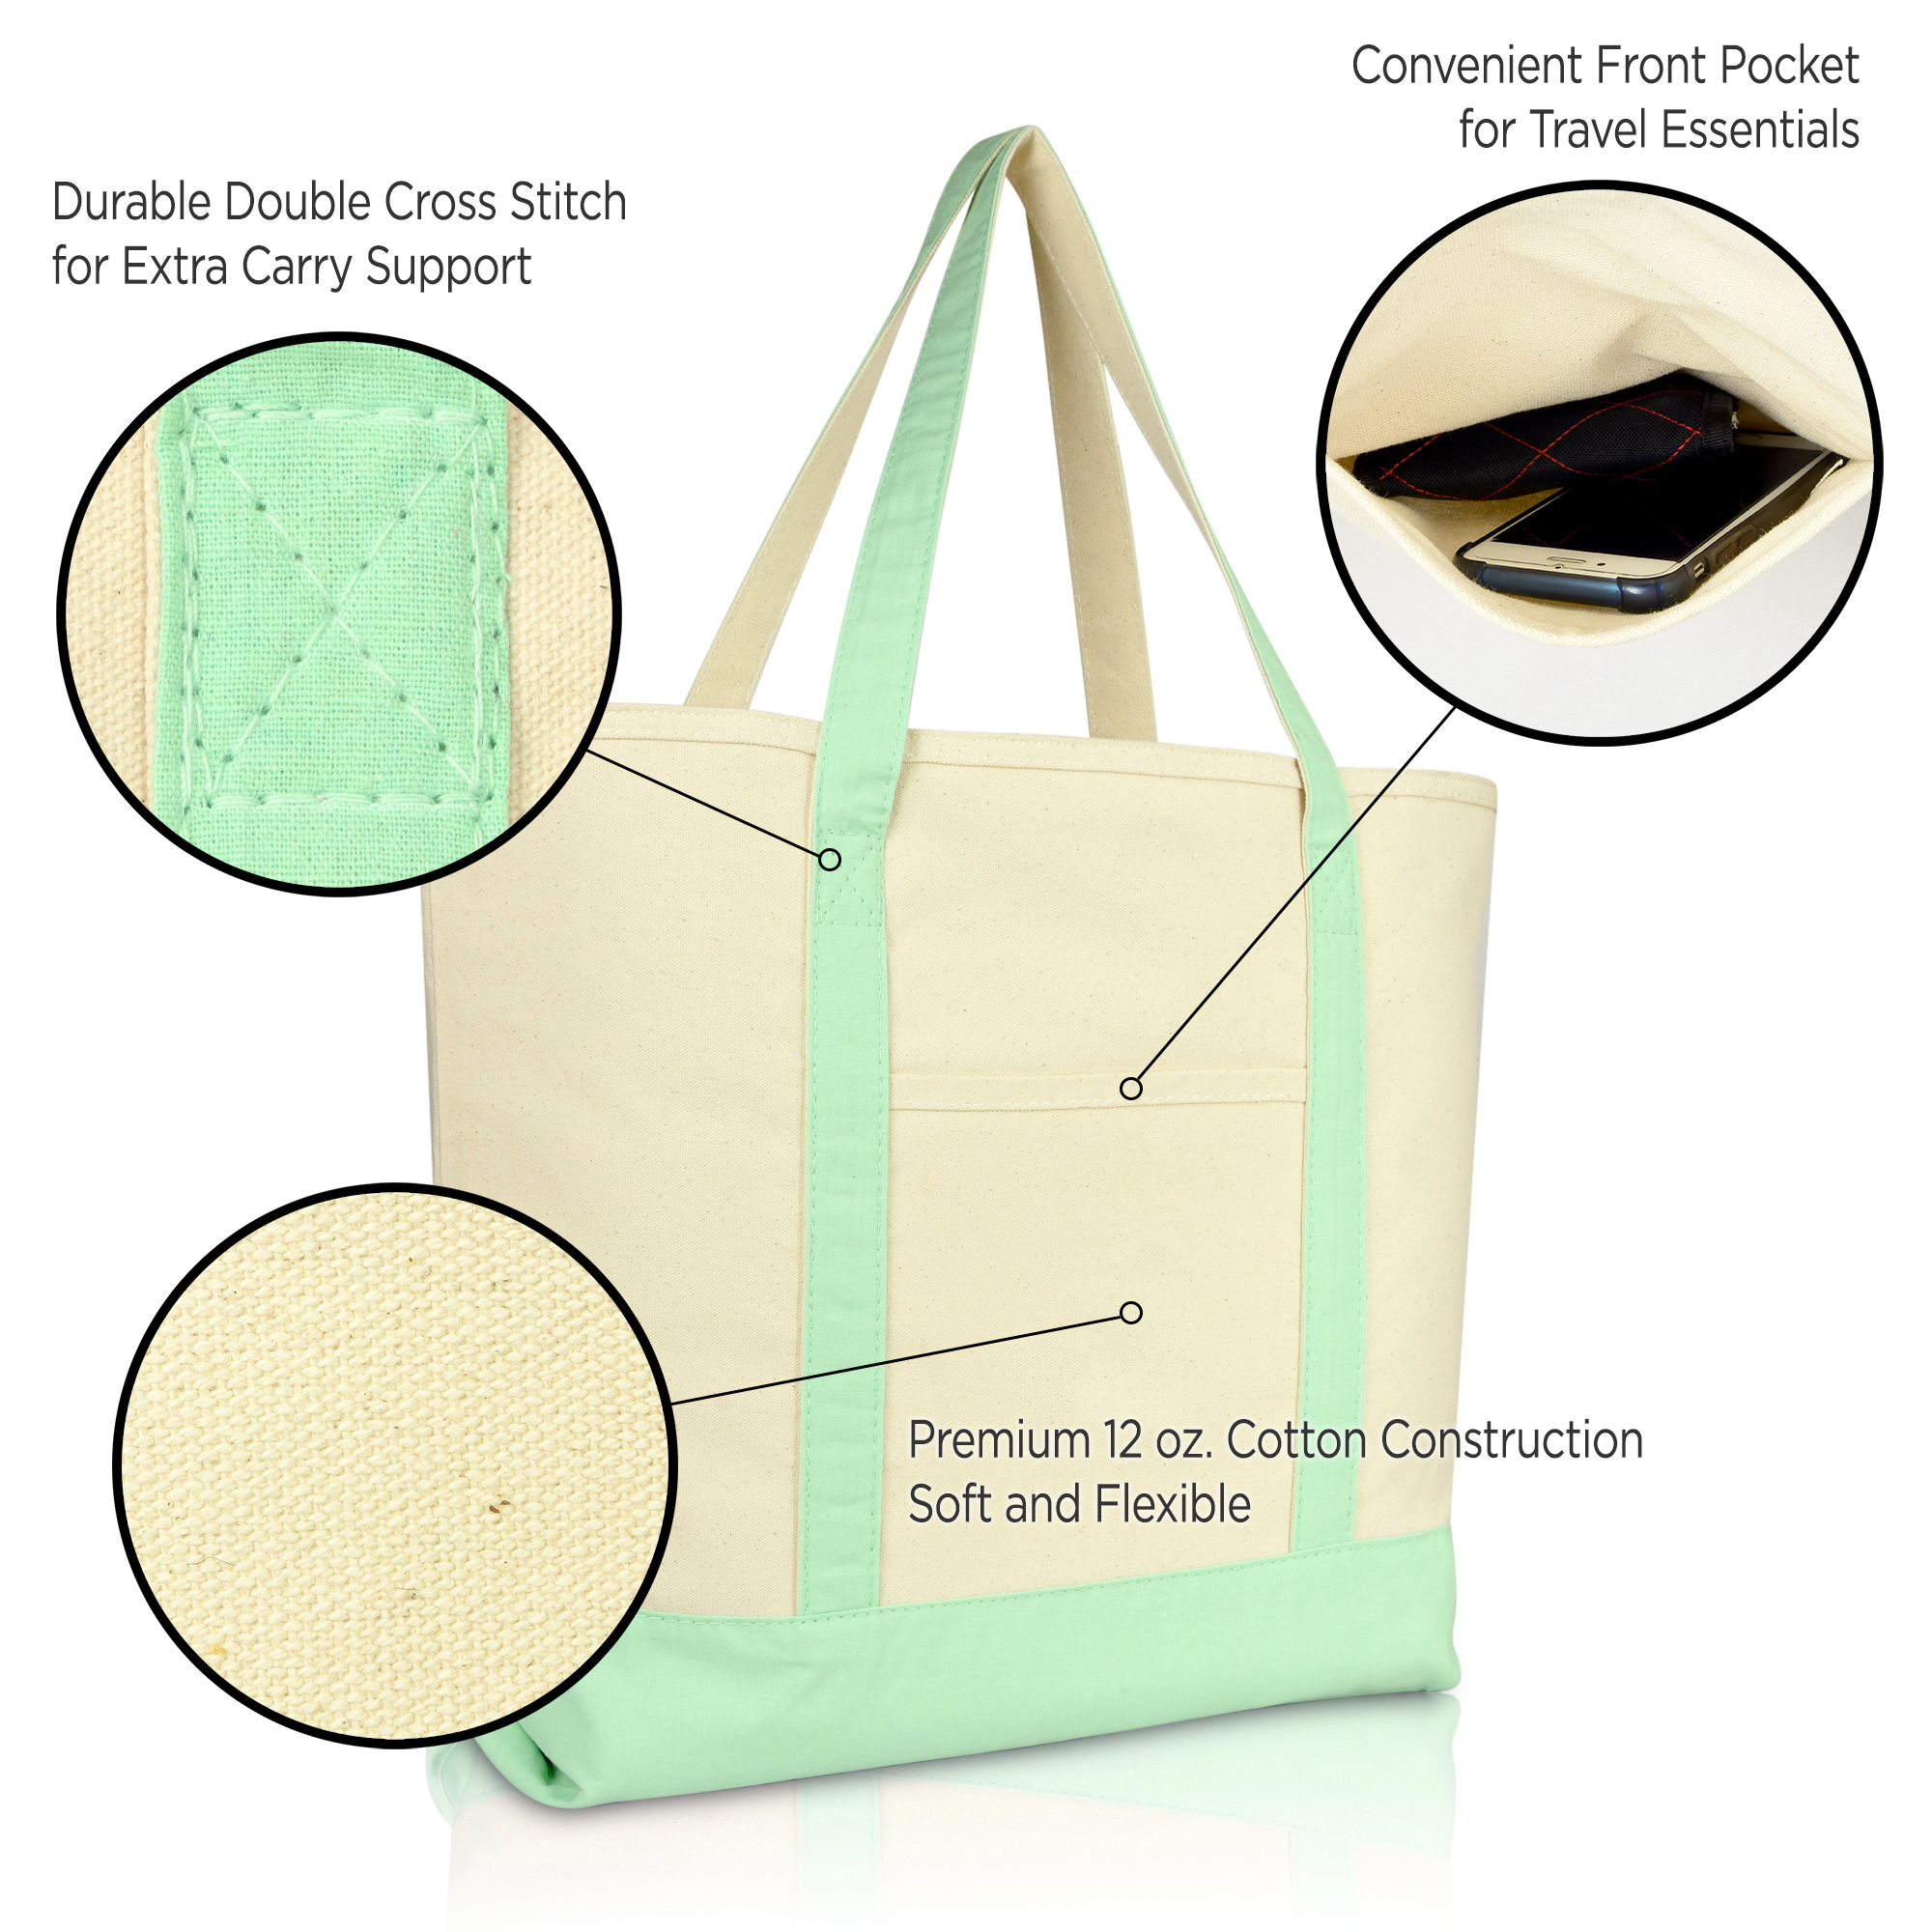 DALIX 22" Extra Large Cotton Canvas Zippered Shopping Tote Grocery Bag in Mint Green - image 3 of 6